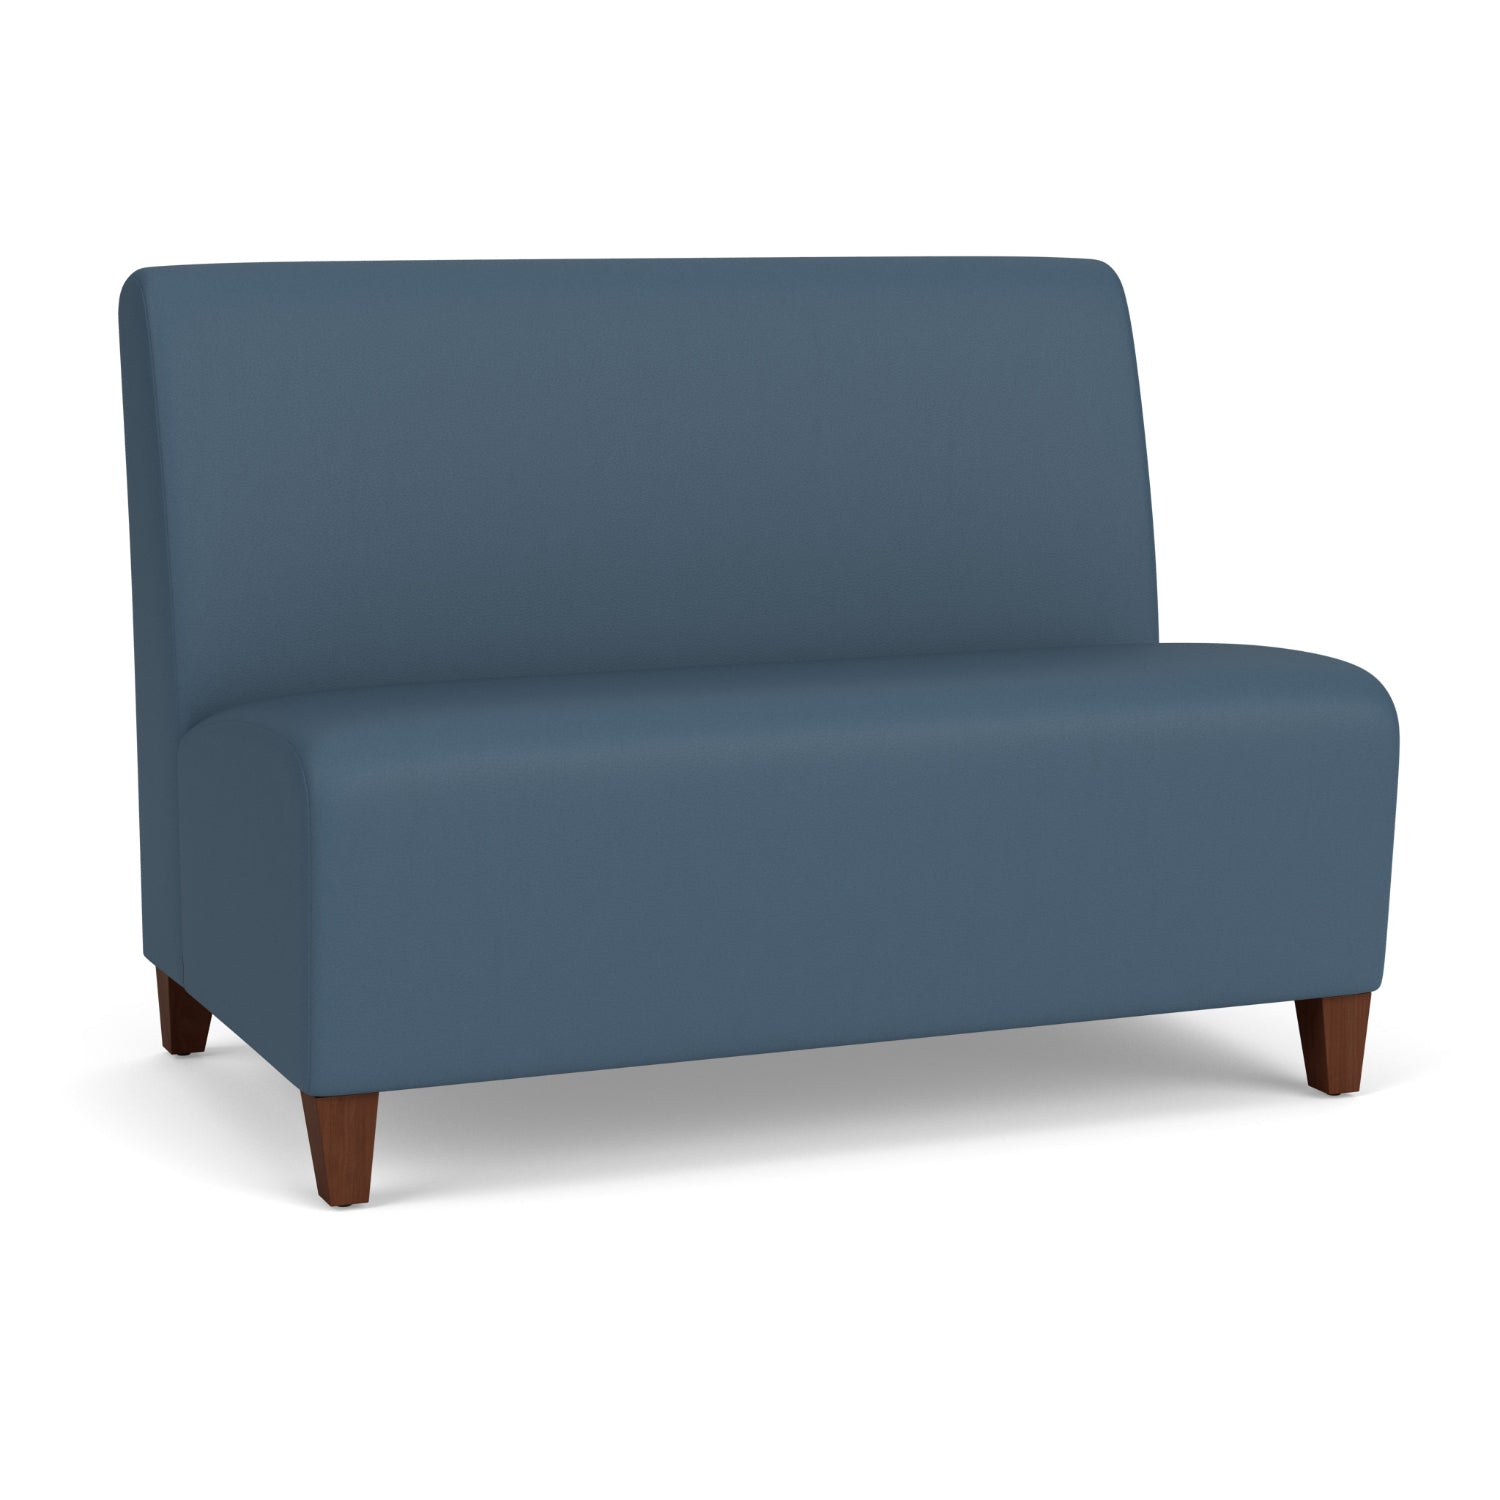 Siena Collection Reception Seating, Armless Loveseat, Standard Vinyl Upholstery, FREE SHIPPING